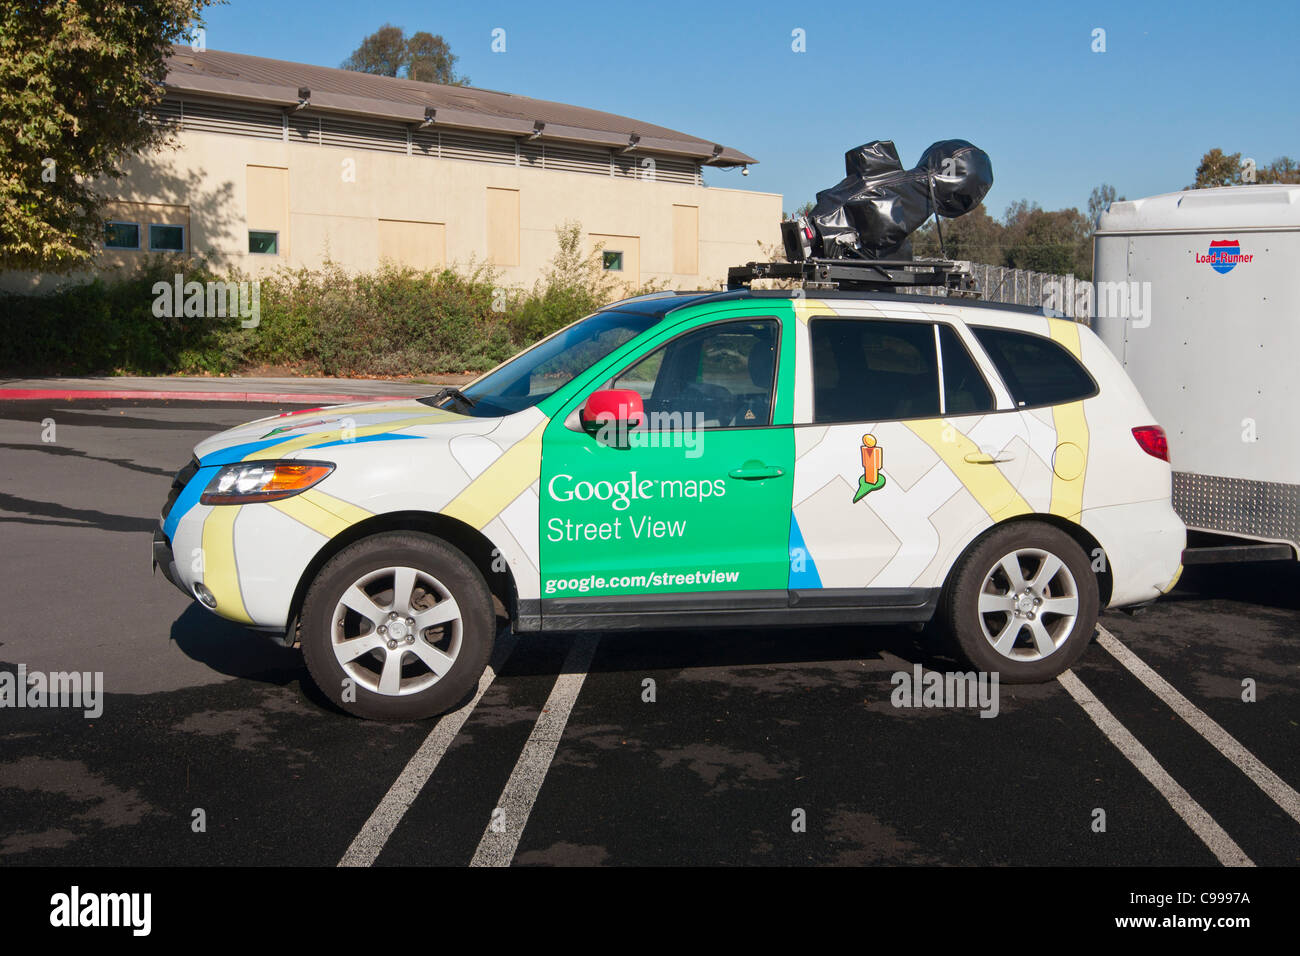 Google vehicle with camera attached to photograph images used in Street View maps. Stock Photo